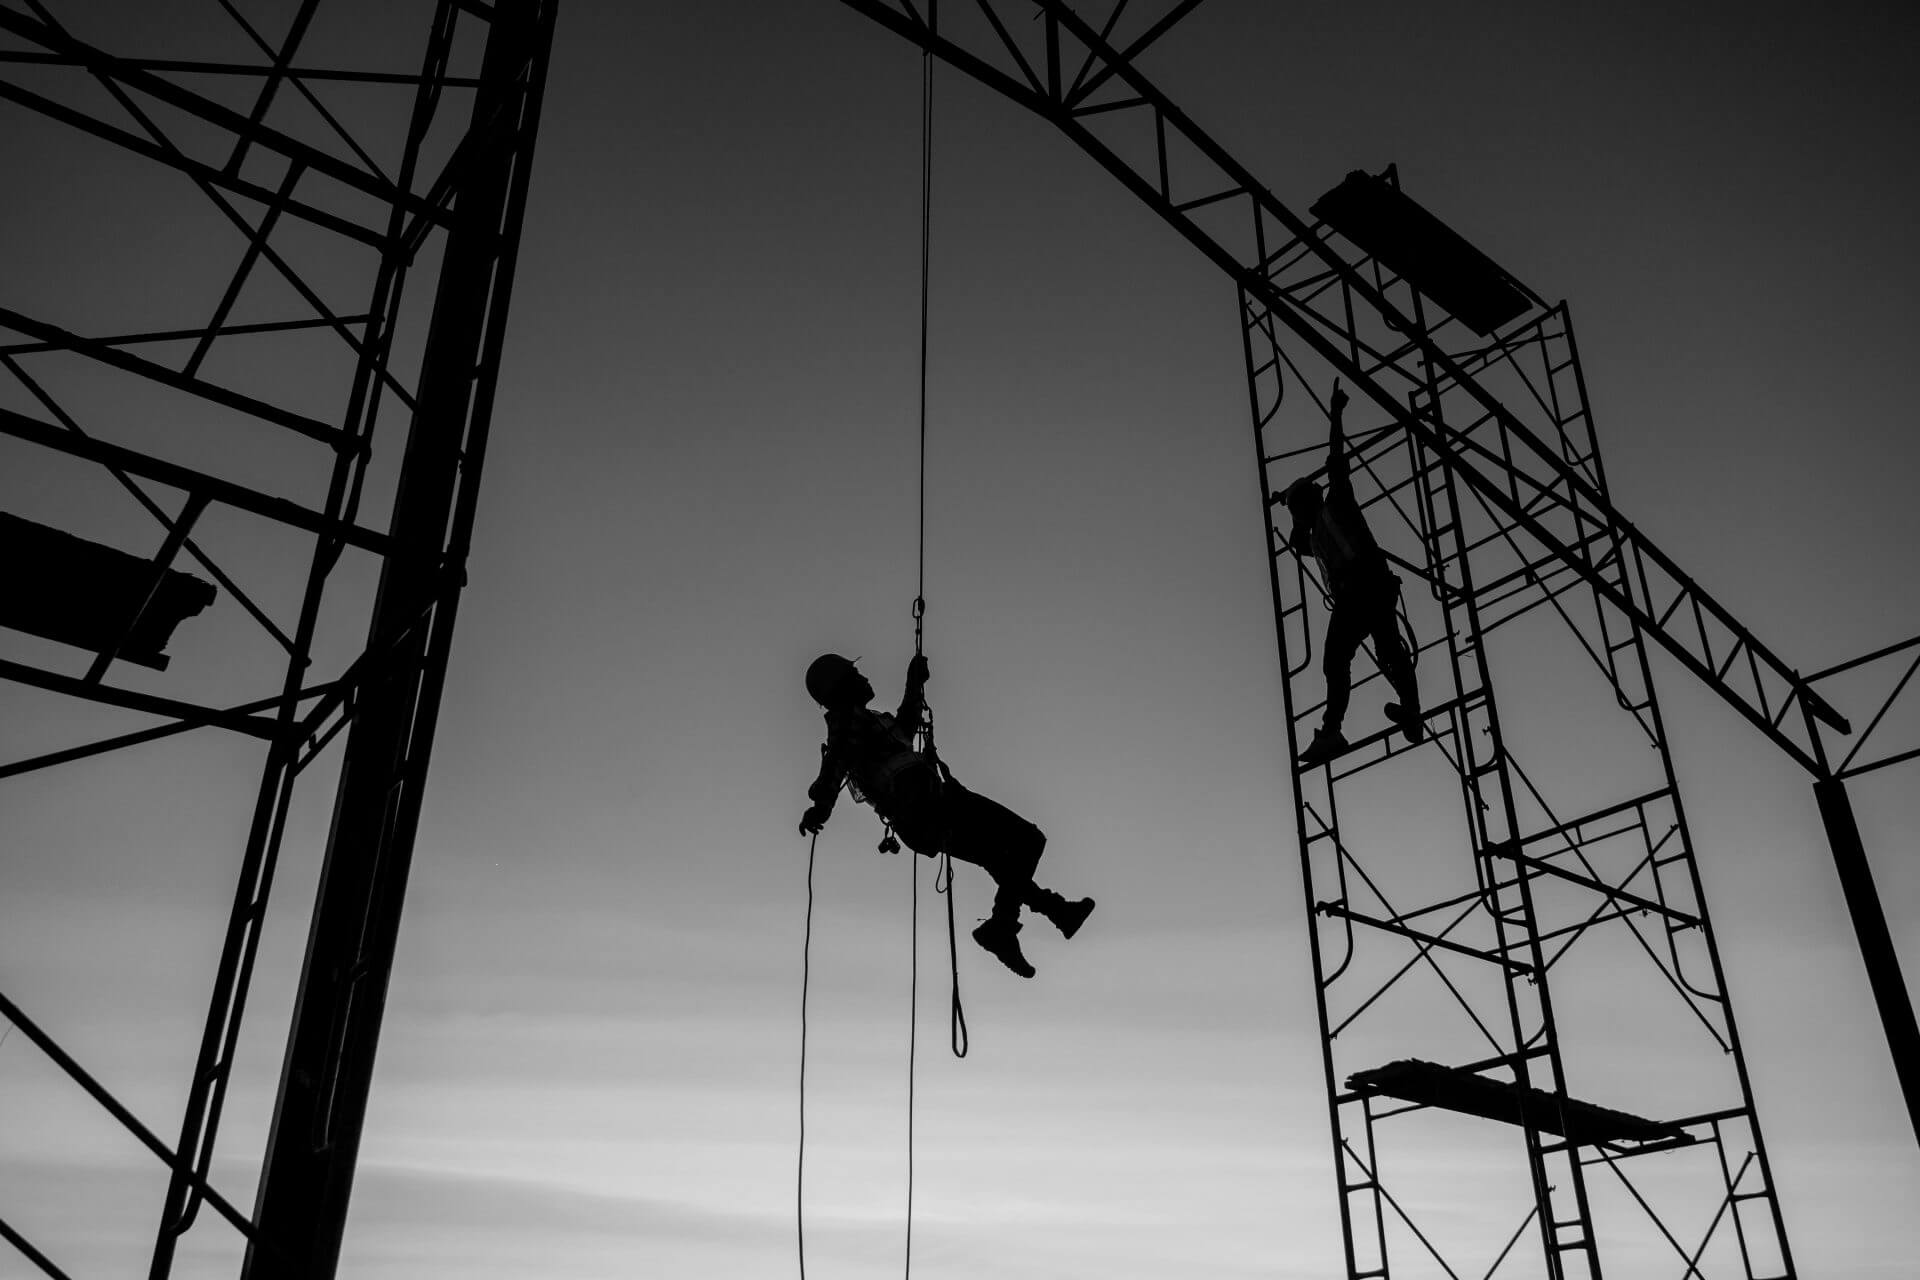 Male working abseiling on a construction site silhouette workerloading=